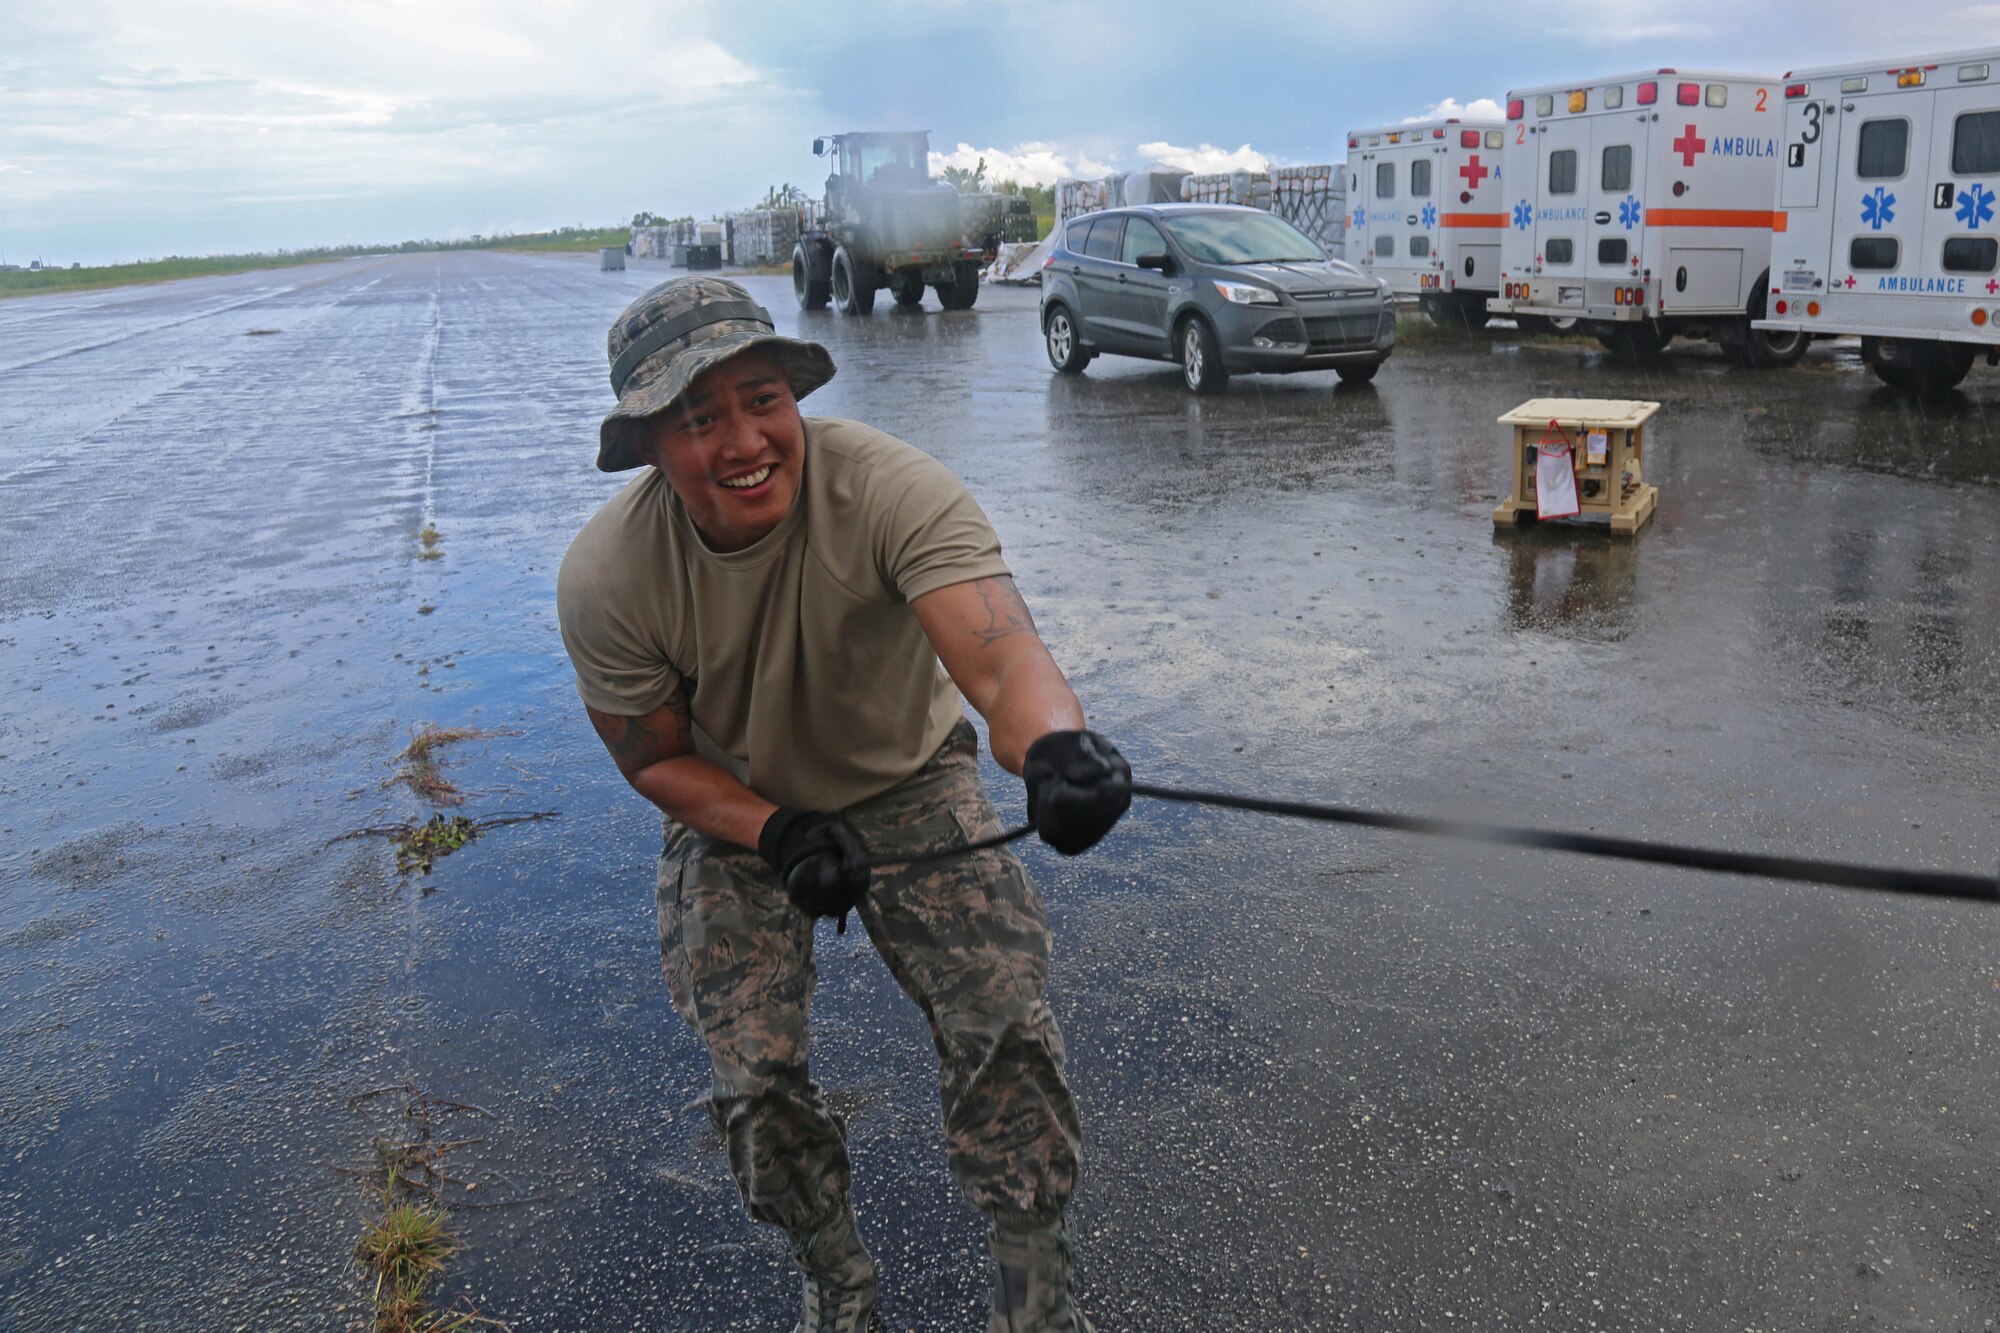 An U.S. Air Force Airman assigned to 633rd Medical Group, assembles medical tents, Aguadilla, Puerto Rico, Oct. 16, 2017. The 633rd Medical Group is conducting medical evacuation and relief efforts to support FEMA in the recovery process of Puerto Rico after the devastation created by Hurricane Maria. (U.S. Army photo by Sgt. Nelson Rodriguez)